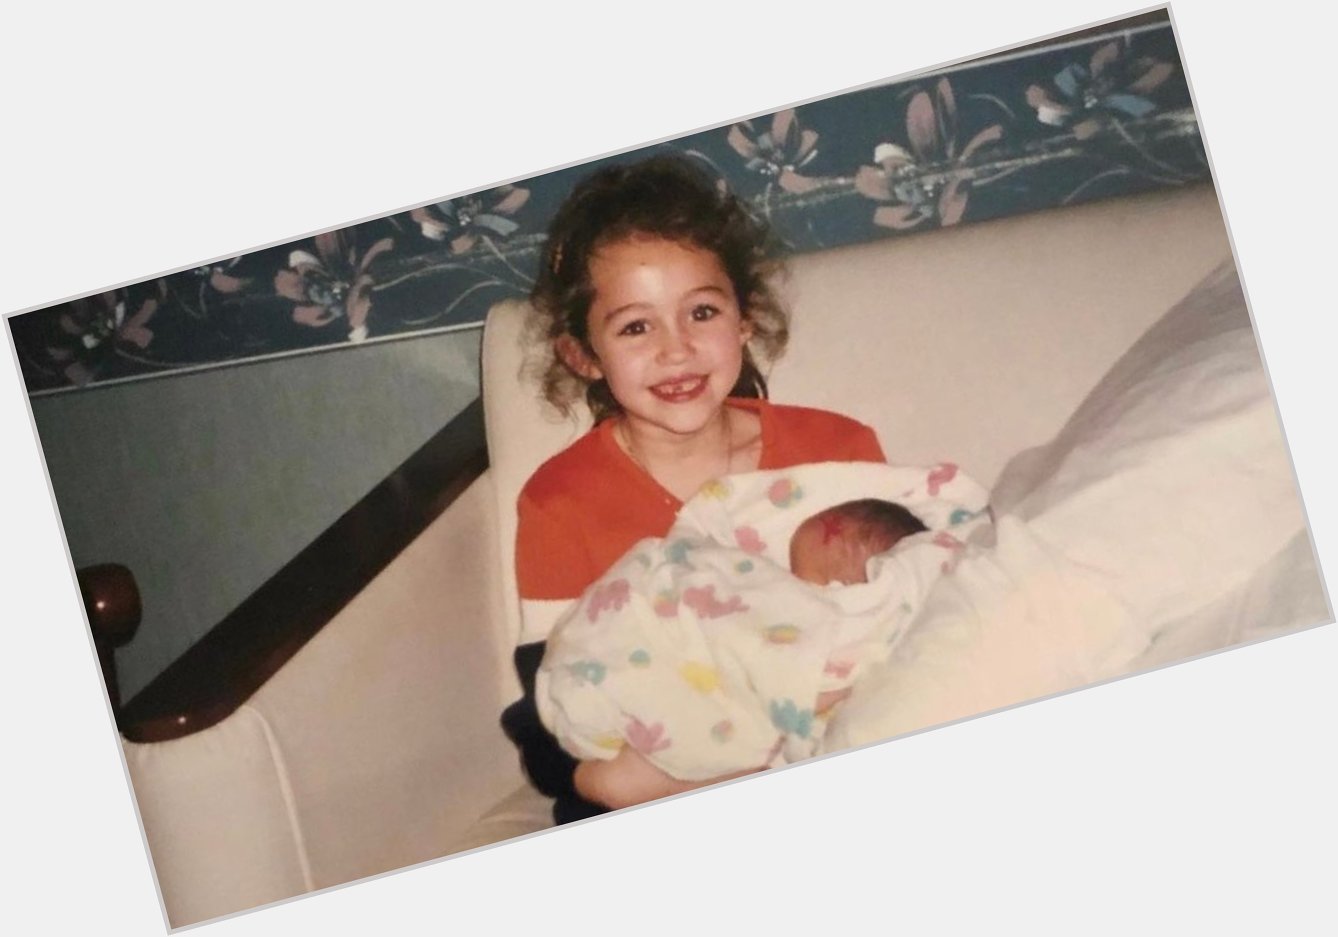 Miley Cyrus wishes little sis Noah Cyrus a happy birthday with an adorable throwback pic   